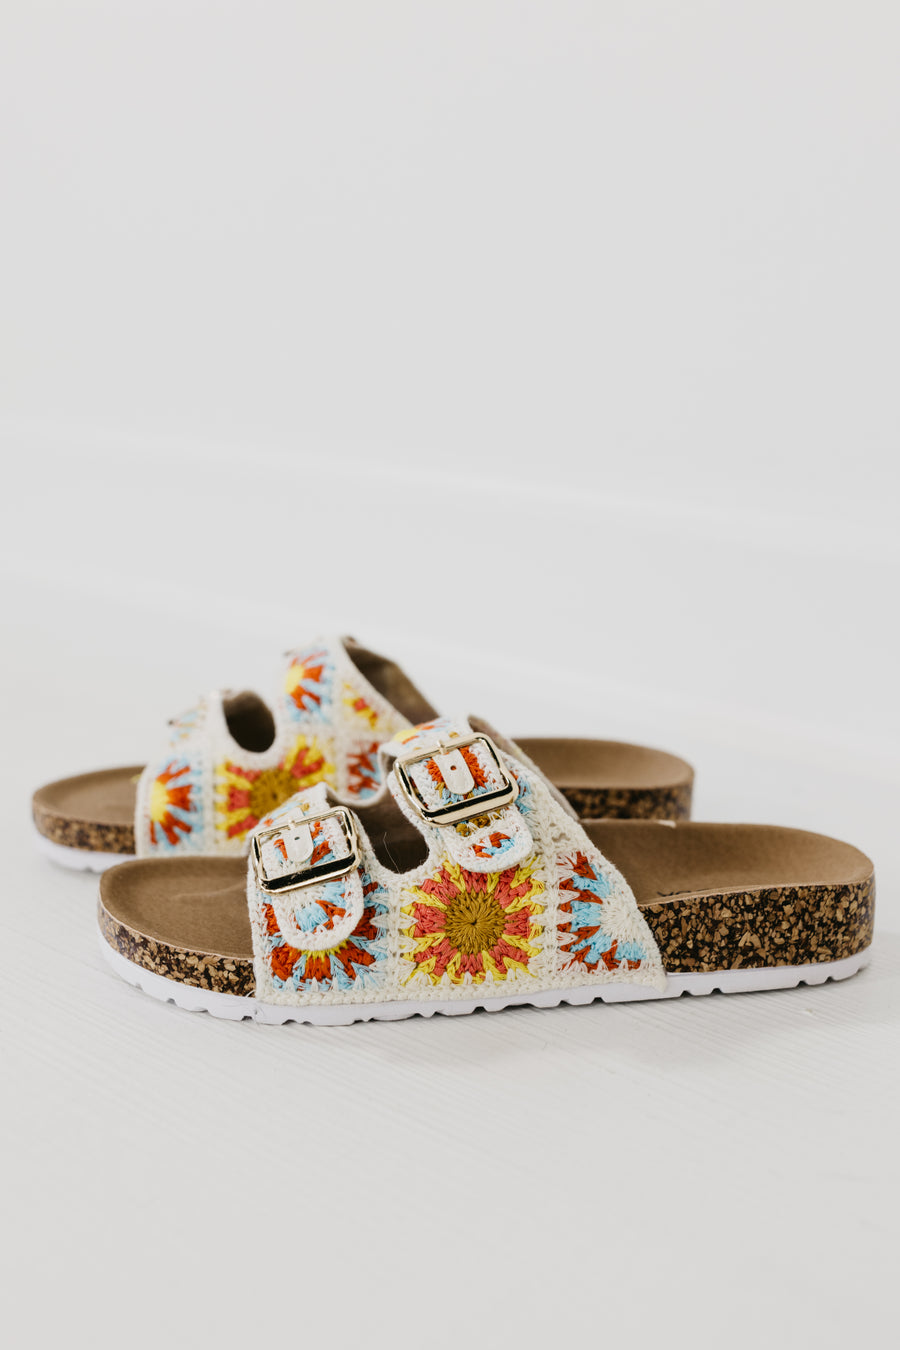 The Mars Embroidered Sandal